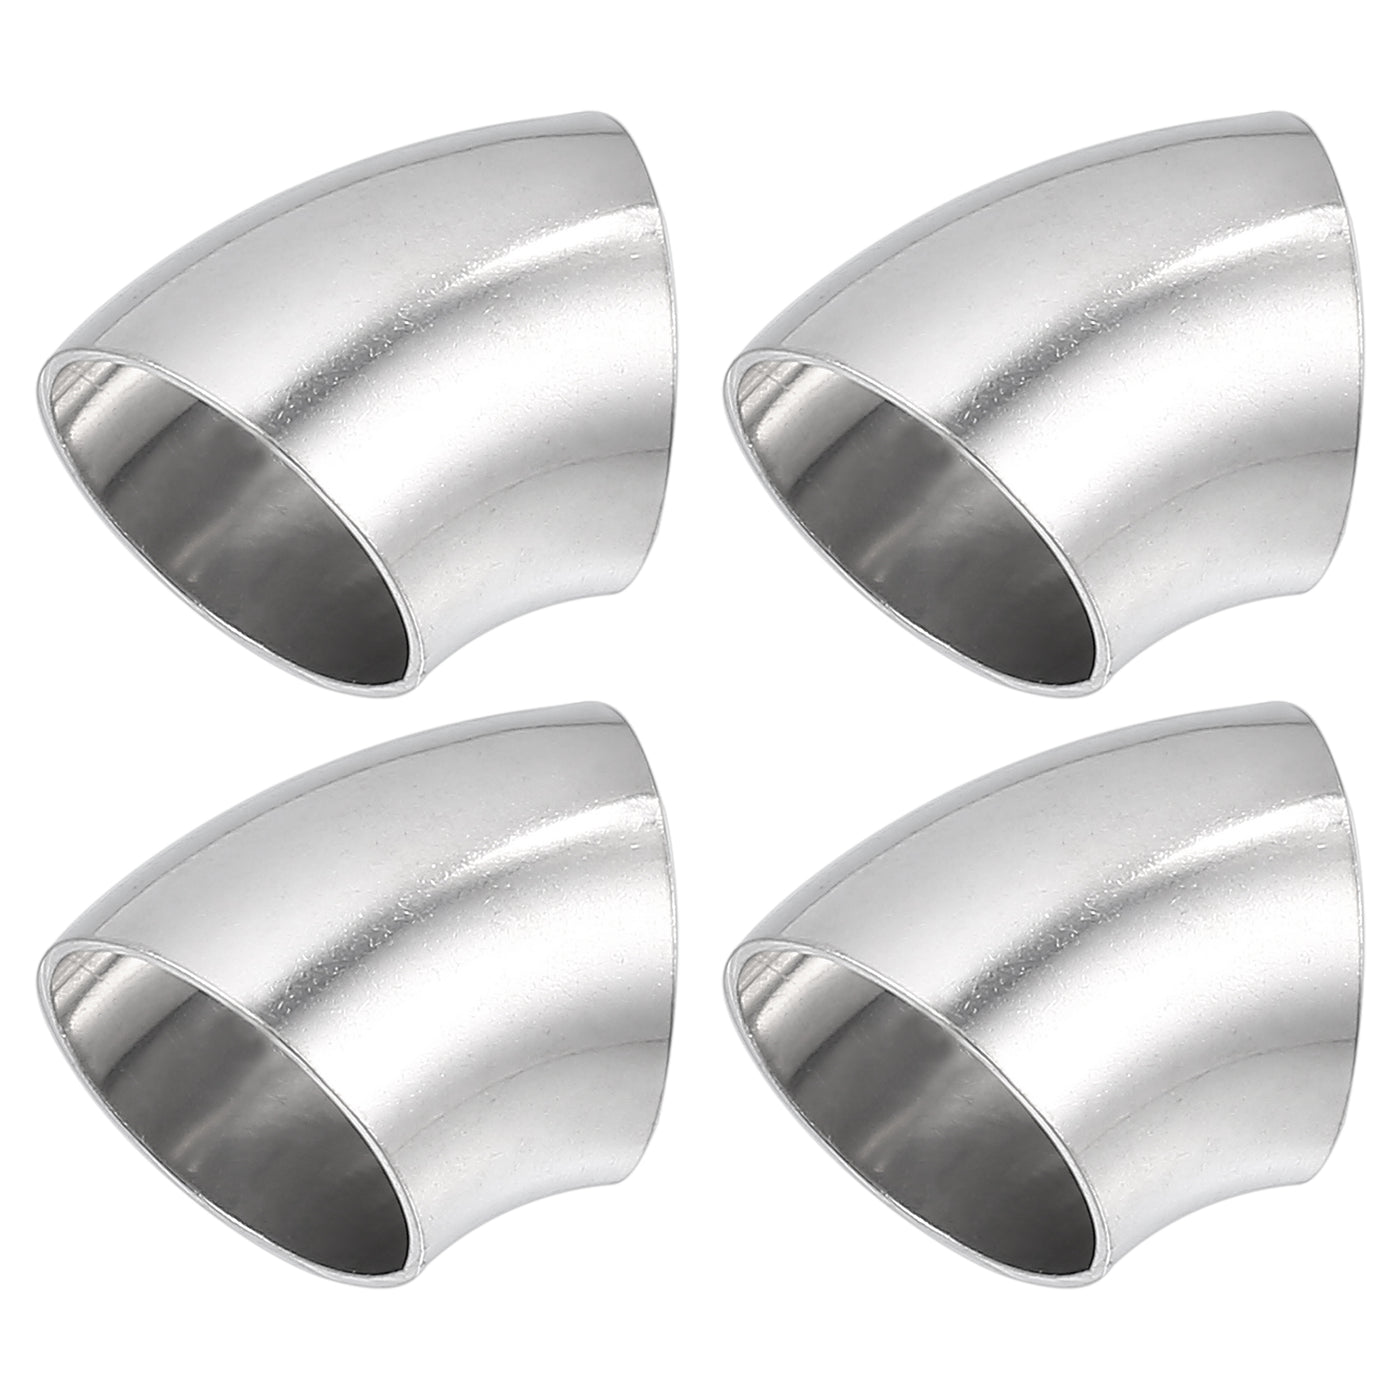 A ABSOPRO 45 Degree Steel Exhaust Elbow Pipe Bend Tube Durable Modified Exhaust Elbow Pipe SS304 Stainless Steel Silver Tone (Set of 4)